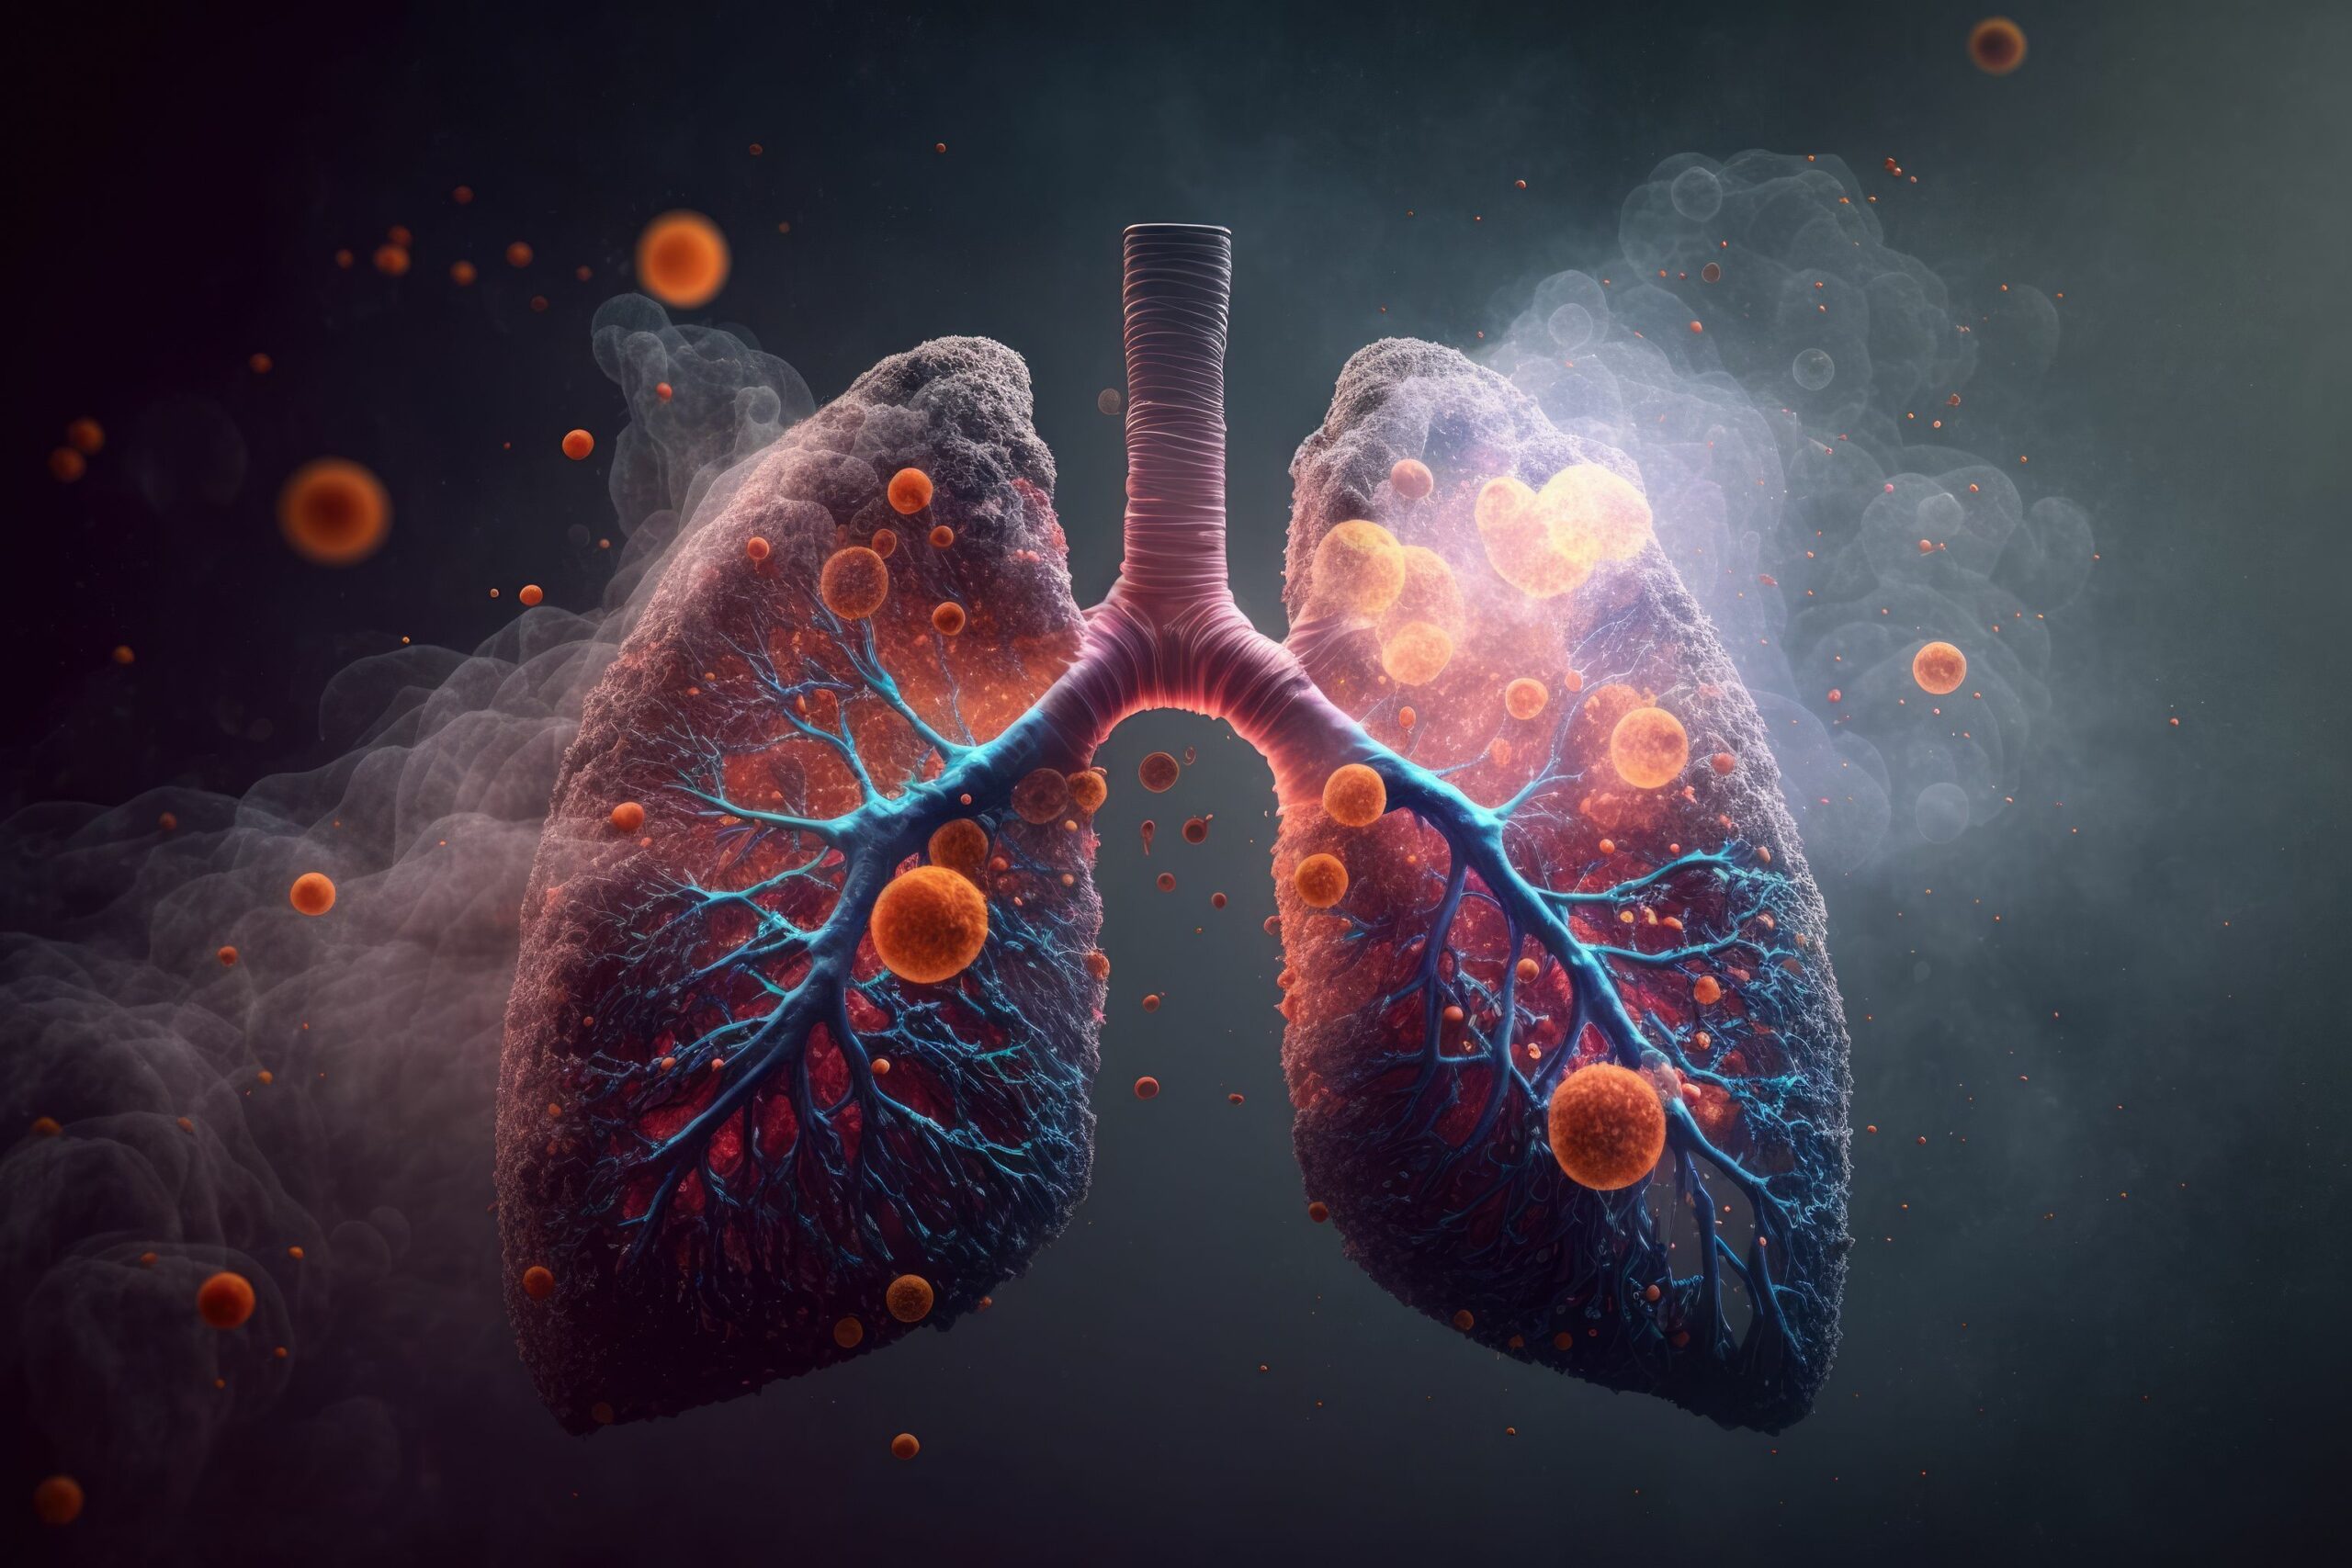 Opdivo and Yervoy Combination Misses Primary Endpoint in Phase III Trial for NSCLC